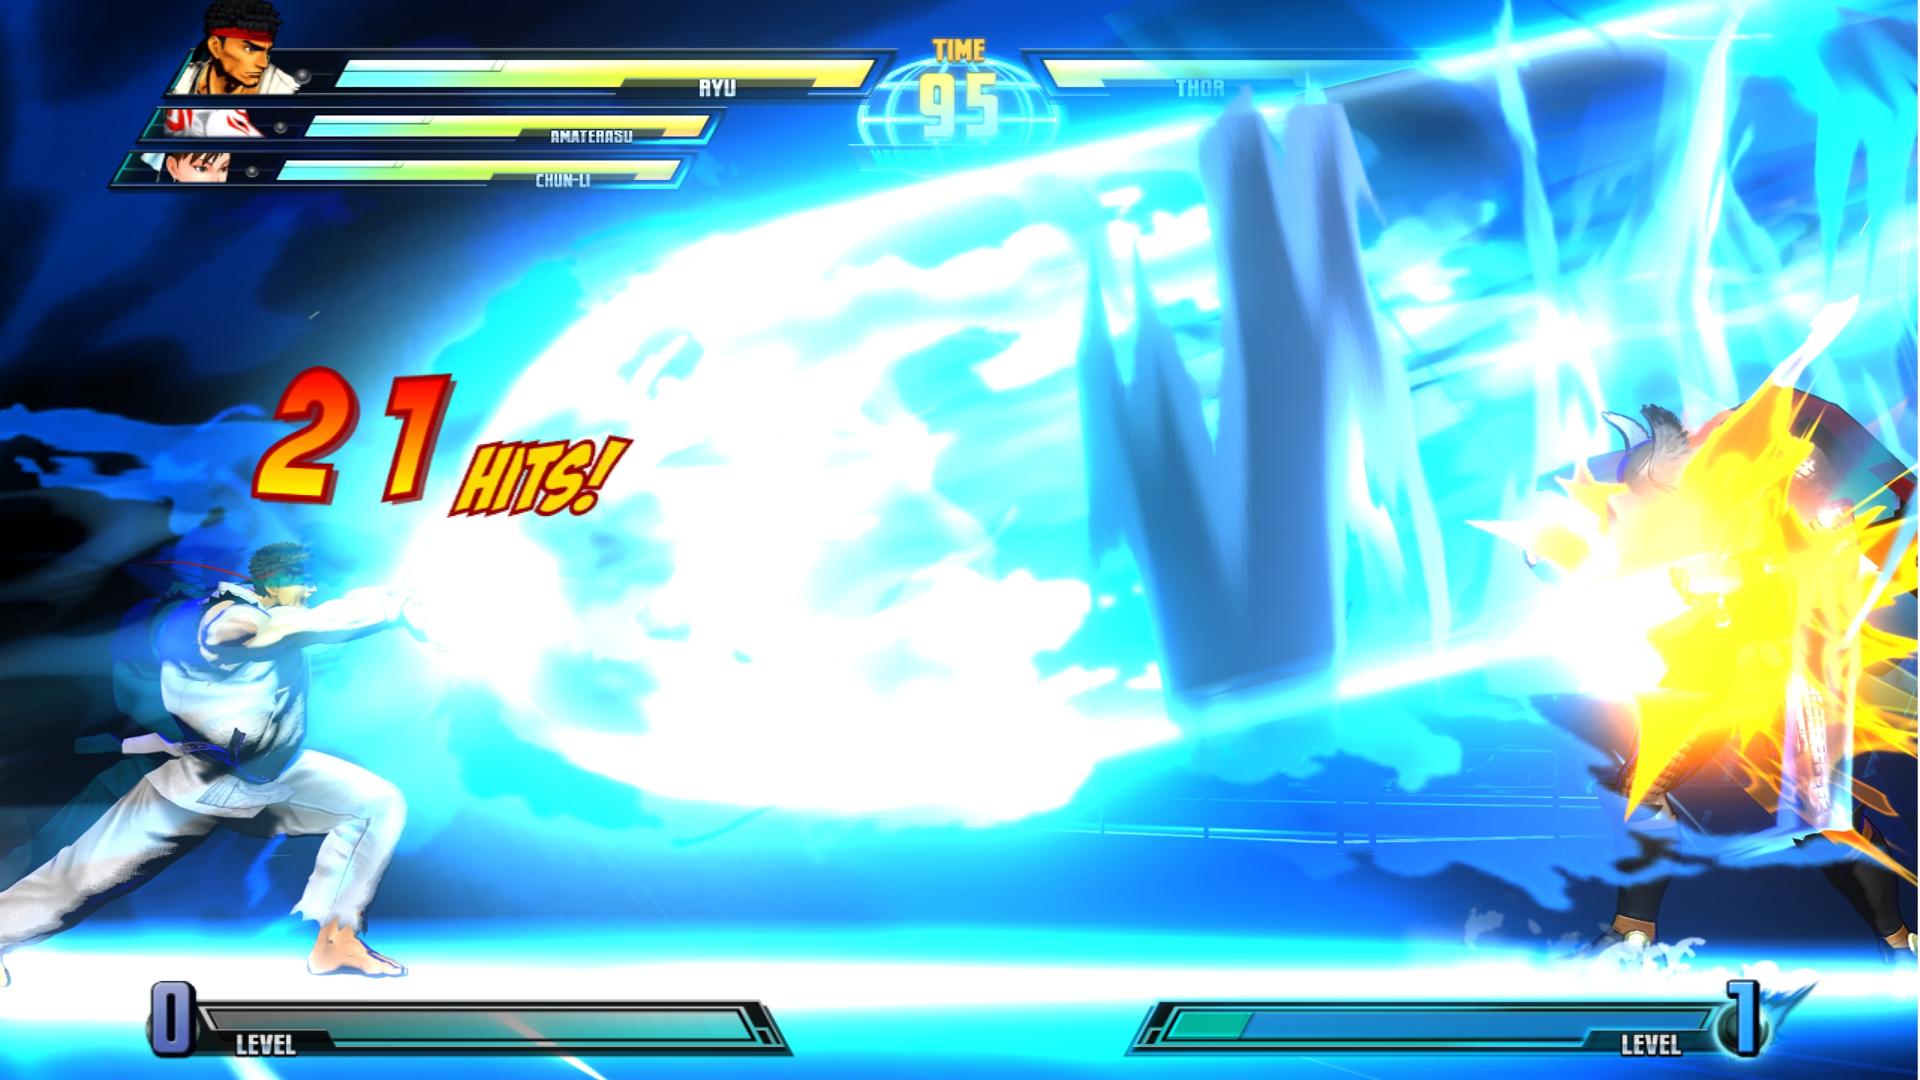 Marvel vs. Capcom 3: Fate of Two Worlds Review – Xbox 360Singleplayer ReviewMultiplayer ReviewOverallOverall Score: 85/100